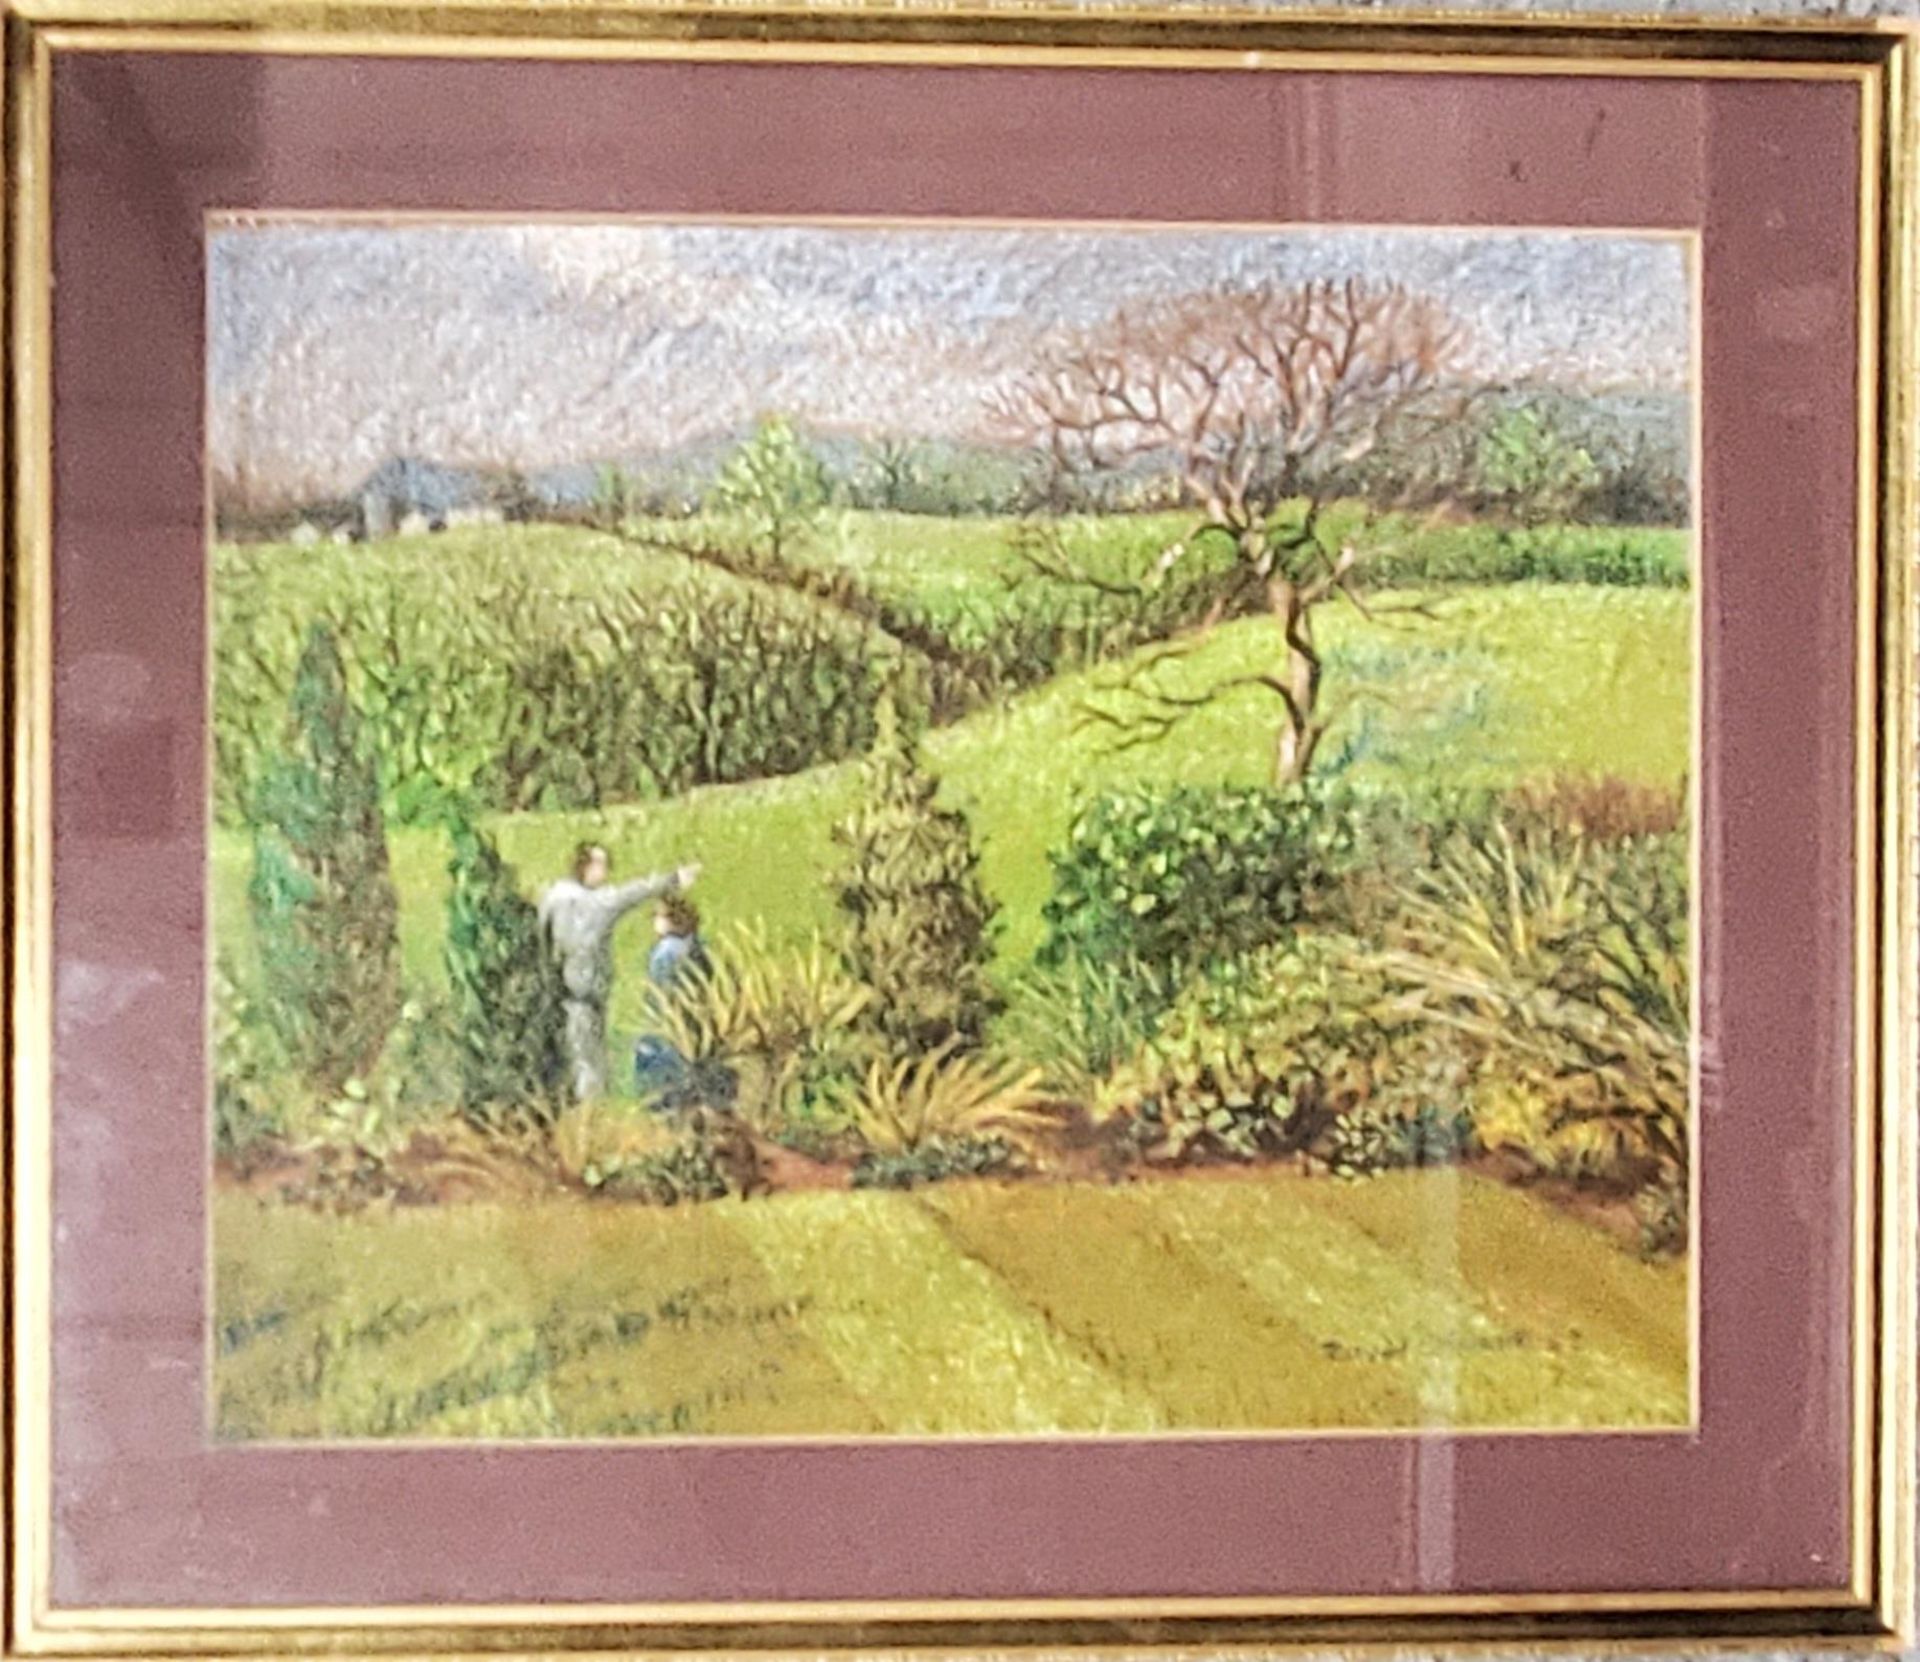 DAVID EDWARDS (BRITISH 20TH CENTURY) TWO FIGURES IN A LANDSCAPE, PASTEL, SIGNED AND DATED 82,